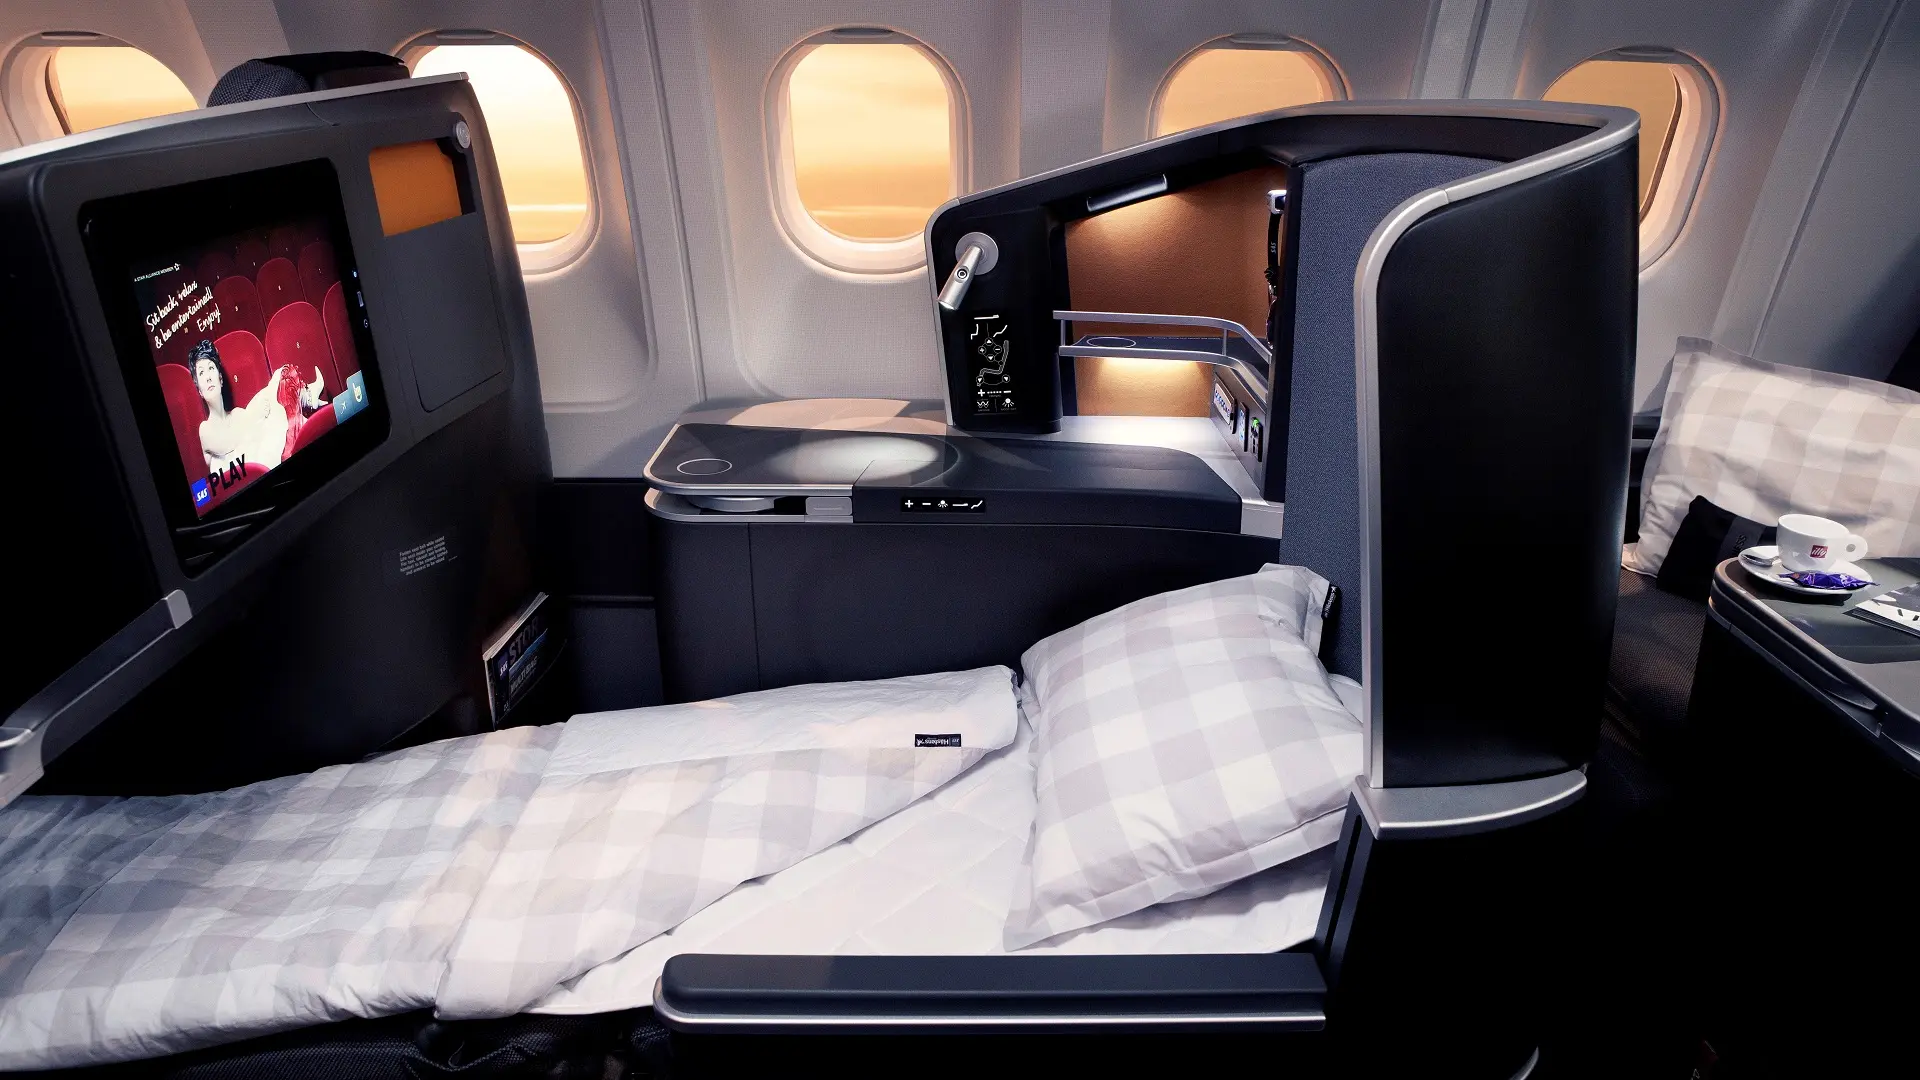 Airlines News - SAS upgrades Champagne offering to “Special Club”